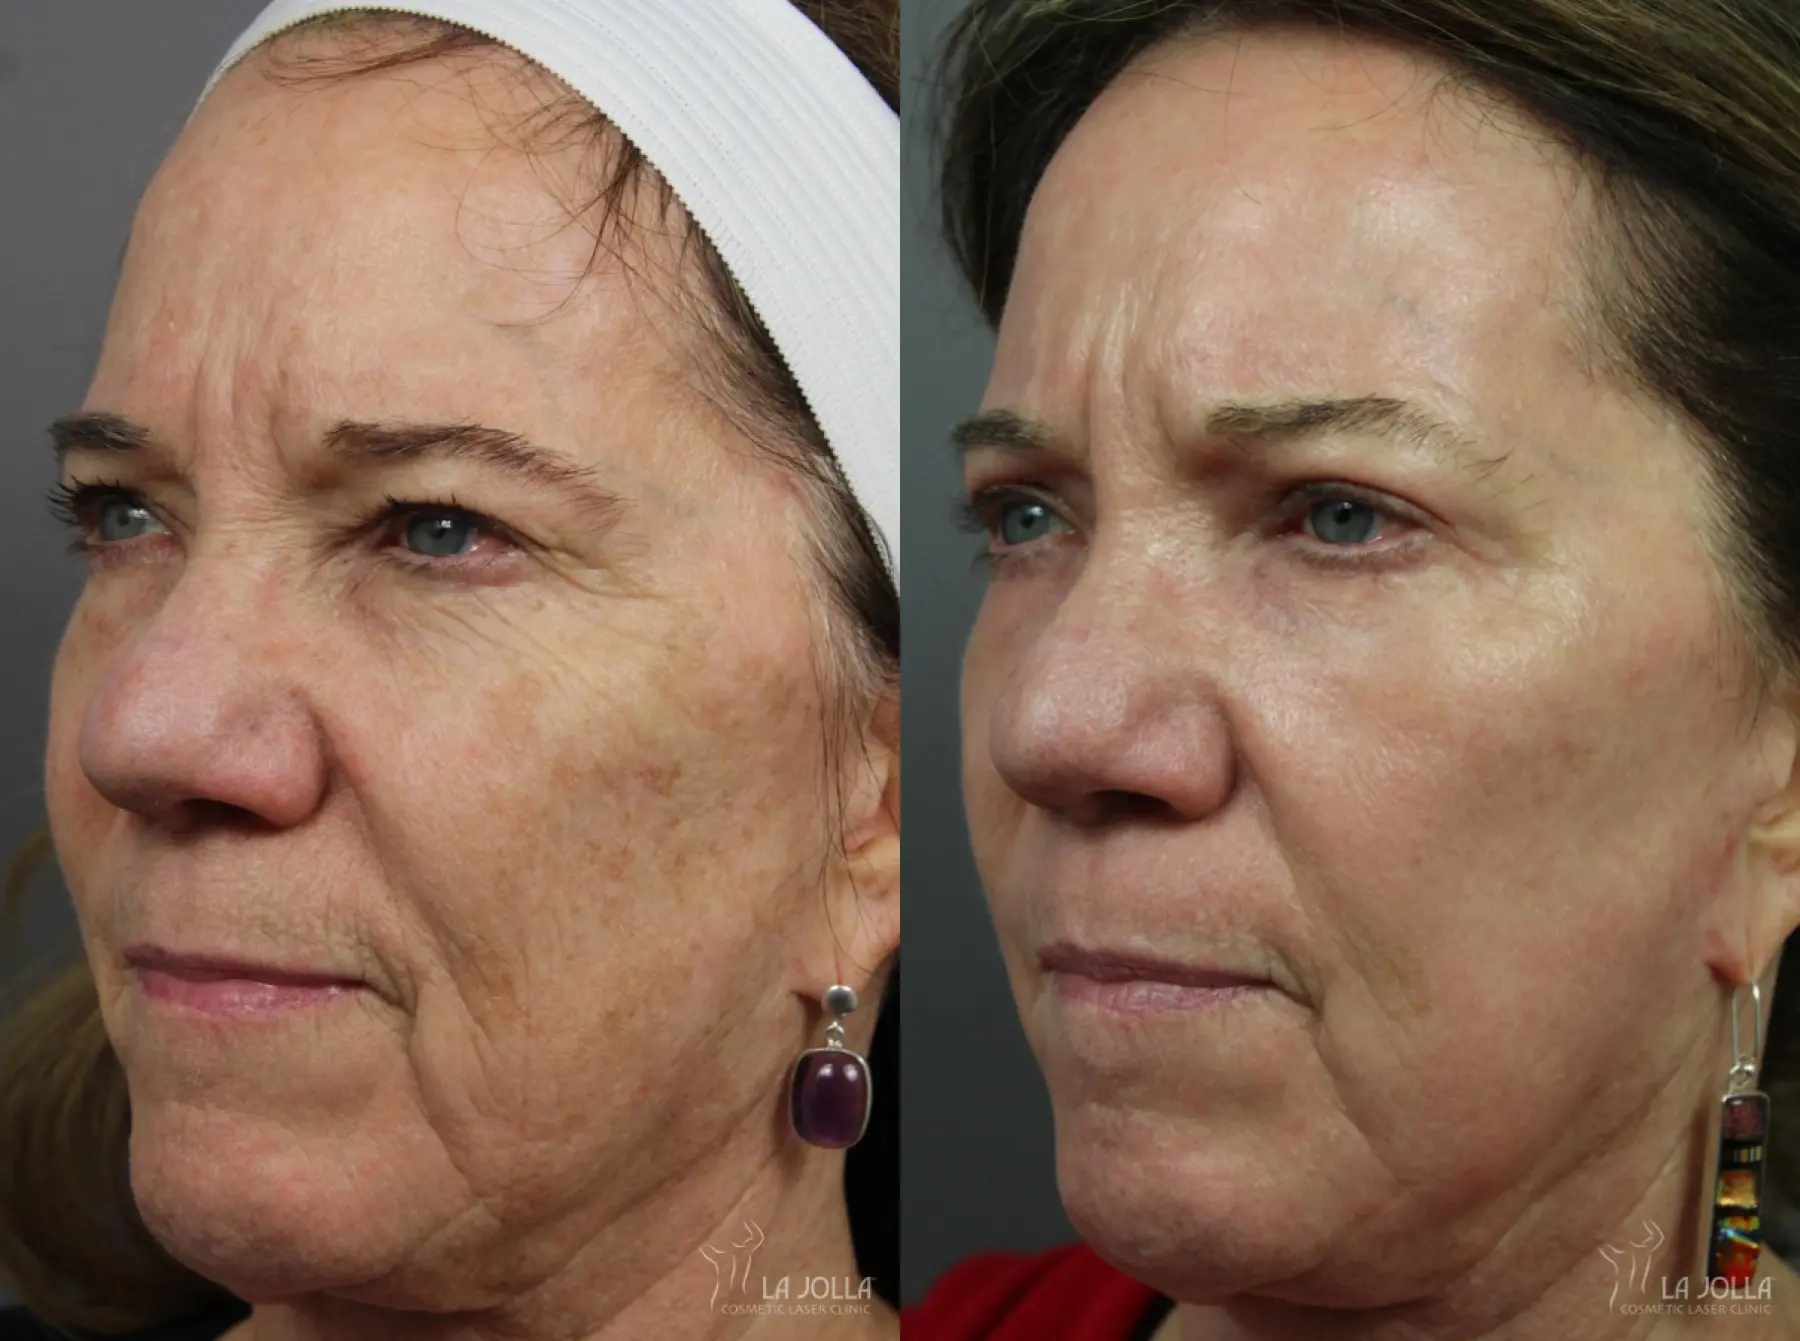 CO2 Laser: Patient 2 - Before and After 1